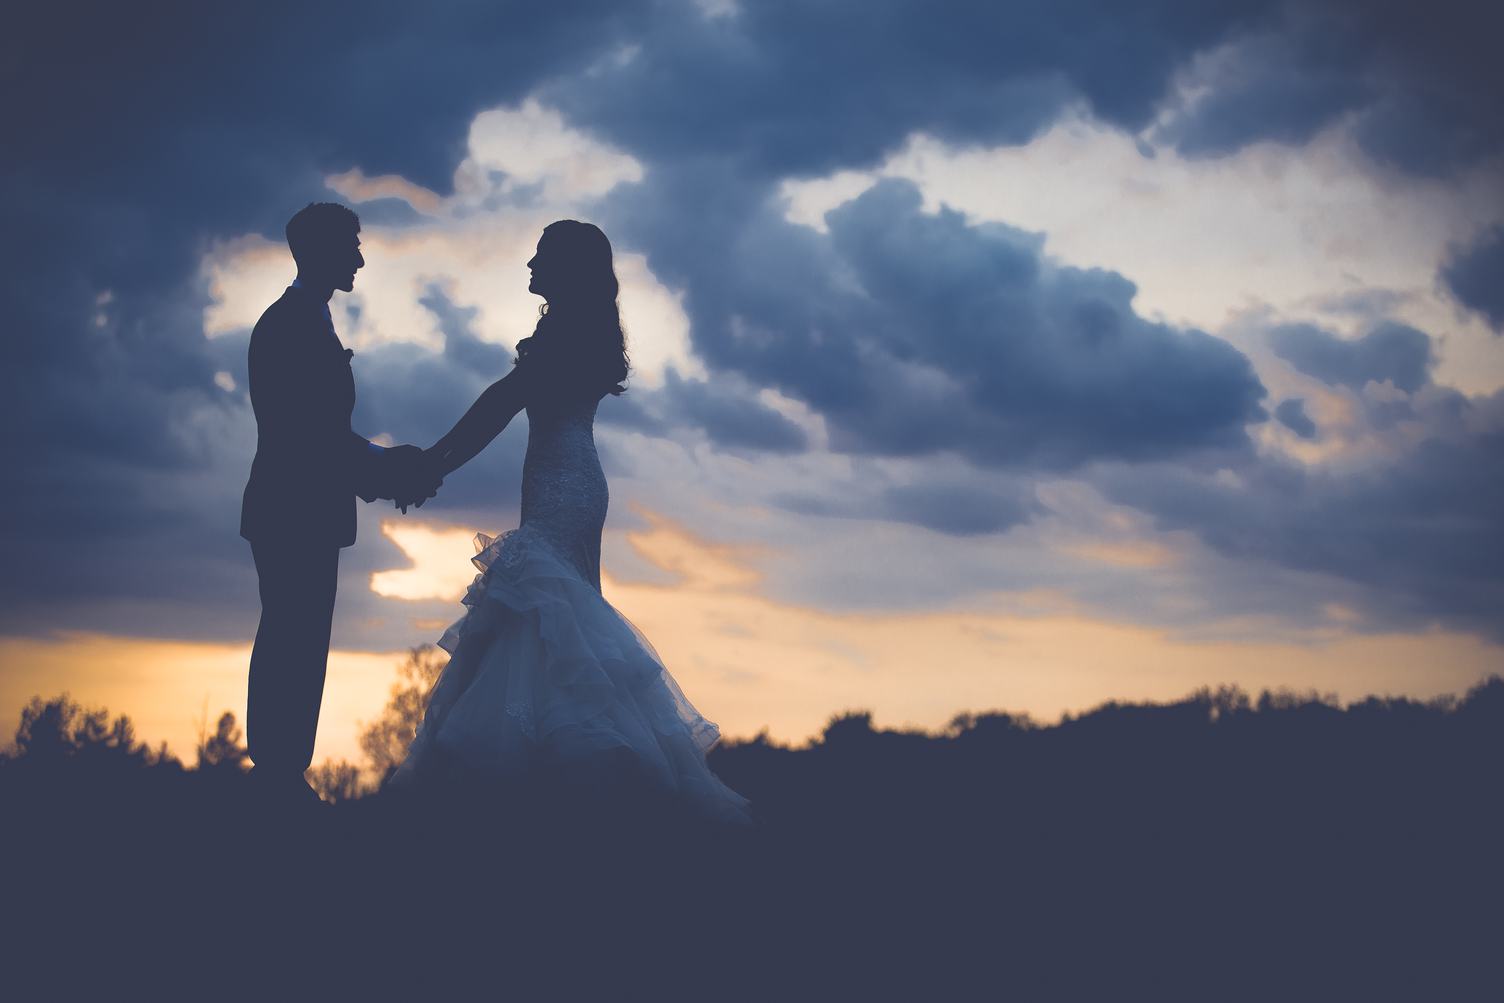 Wedding Couple on the Hill Holding Hands at Sunset